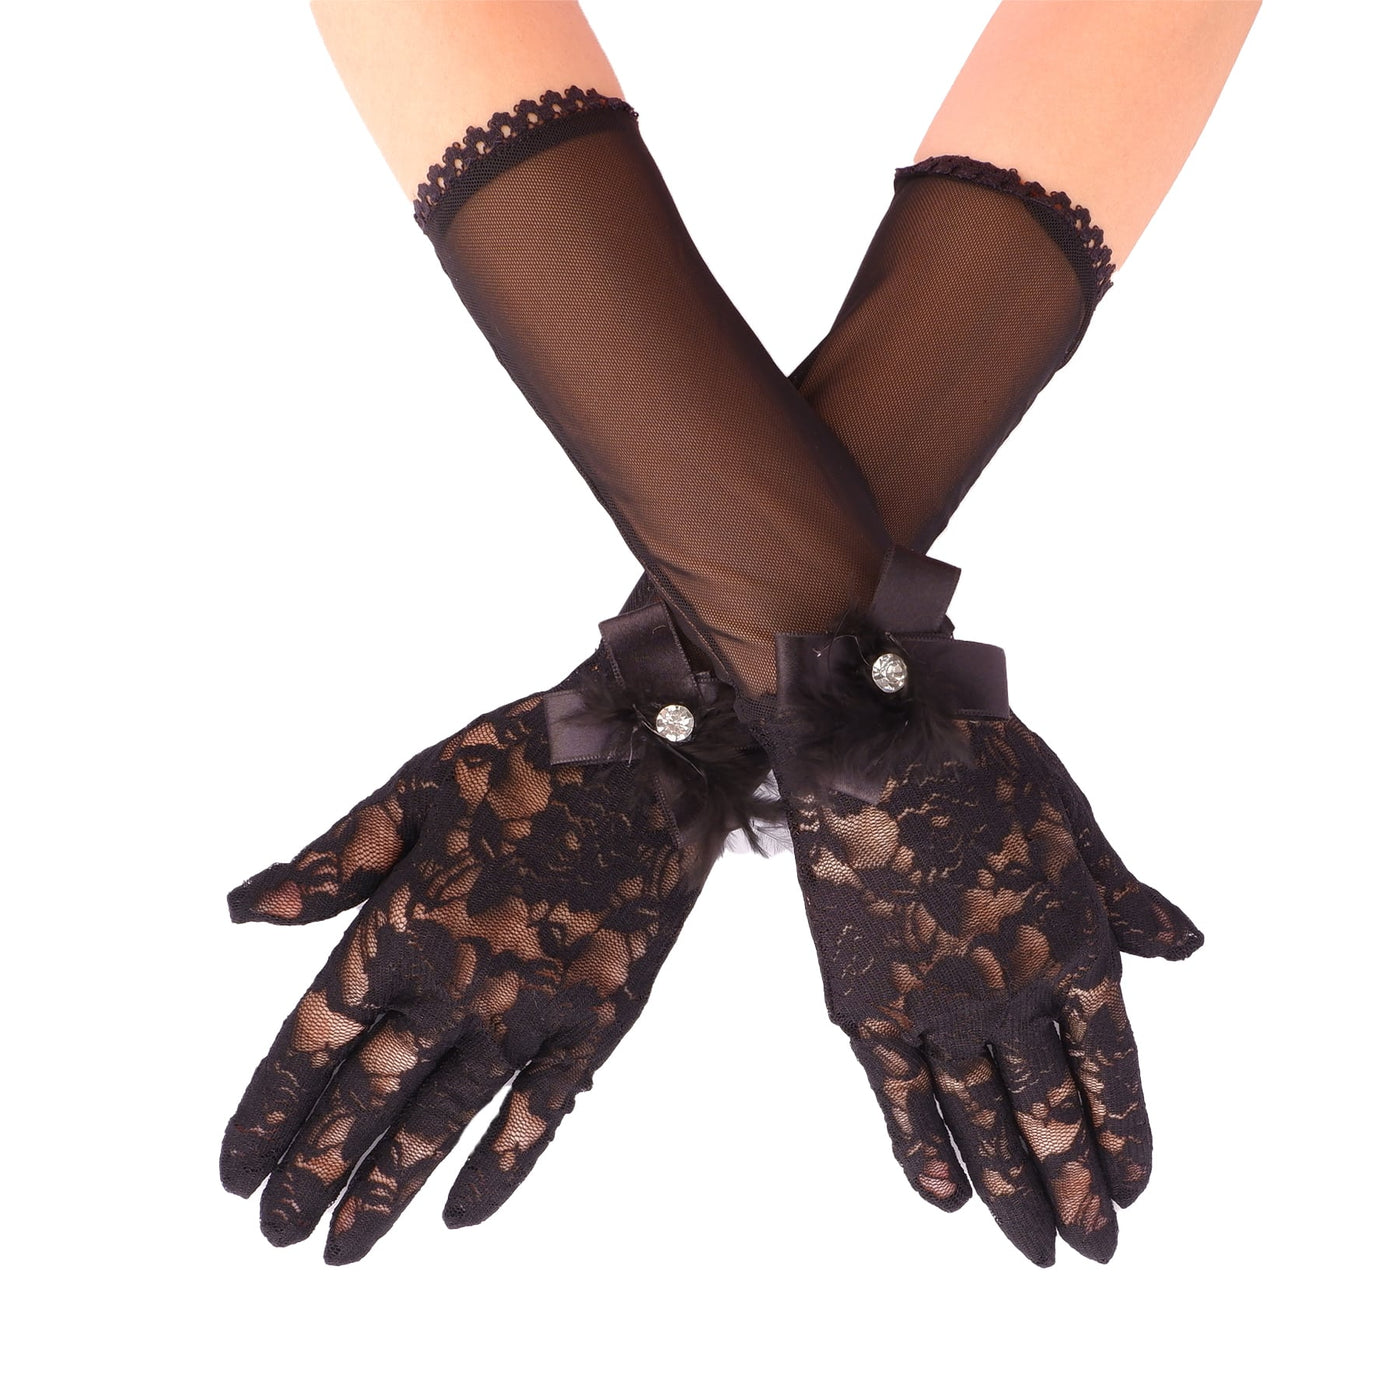 Feathered Ribbon Lace Bridal Gloves Long Model Tulle Gloves for Henna Night Gloves for Women